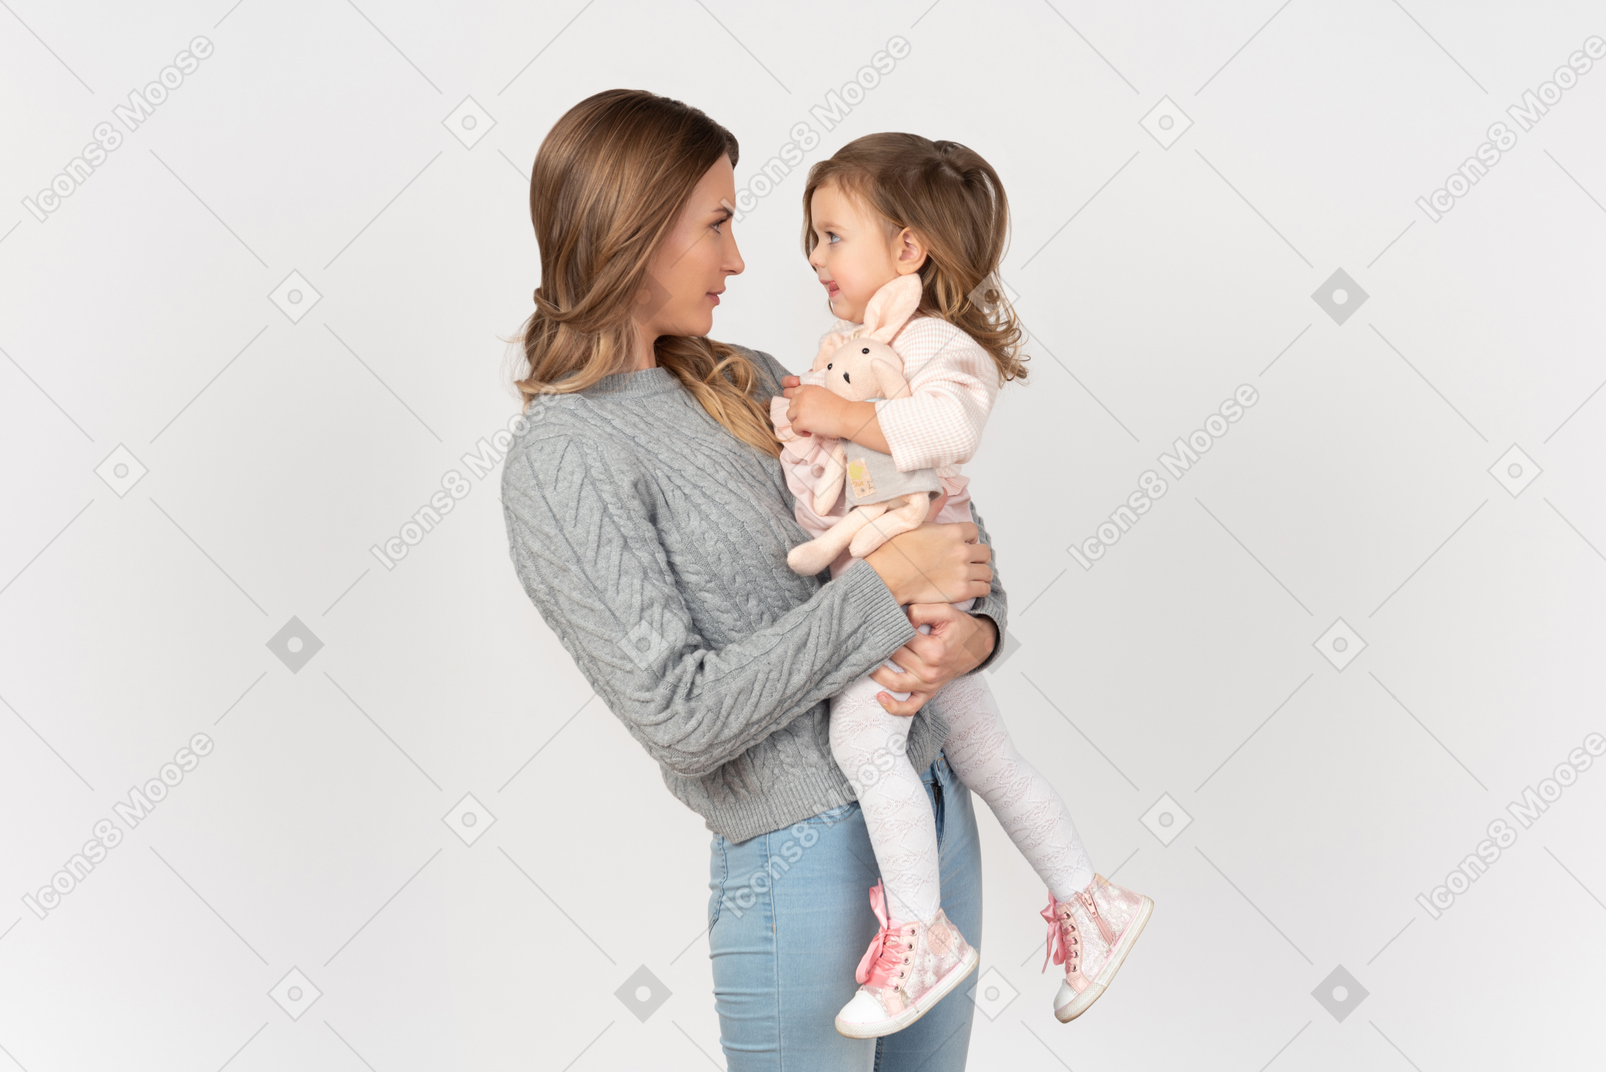 Safe and happy in her mother's arms